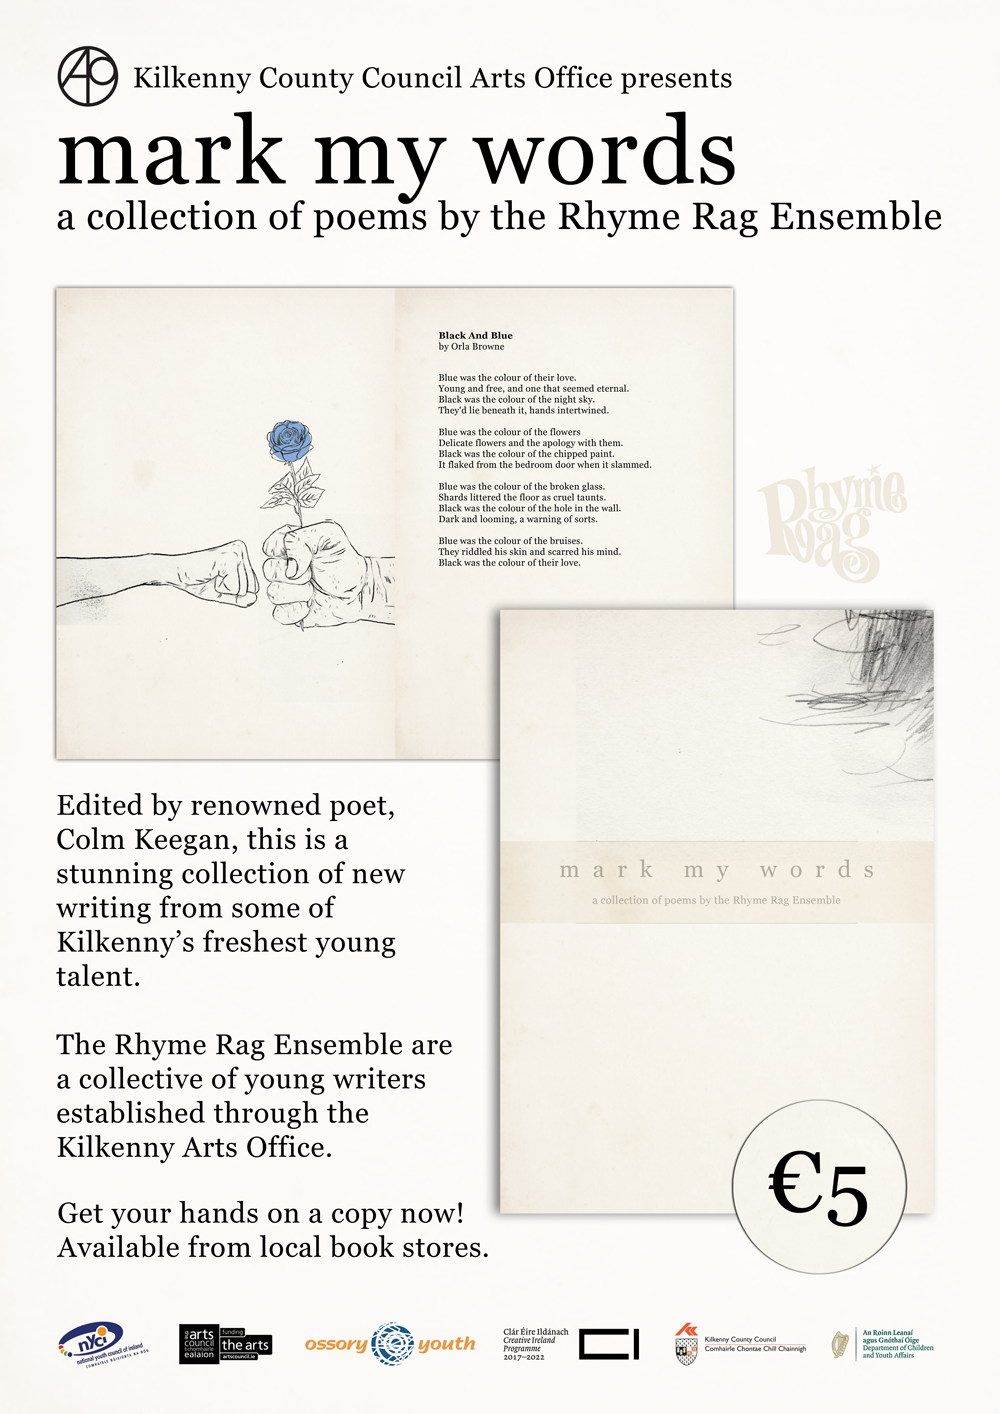 Young Kilkenny Writers Publish A New Poetry Collection Mark